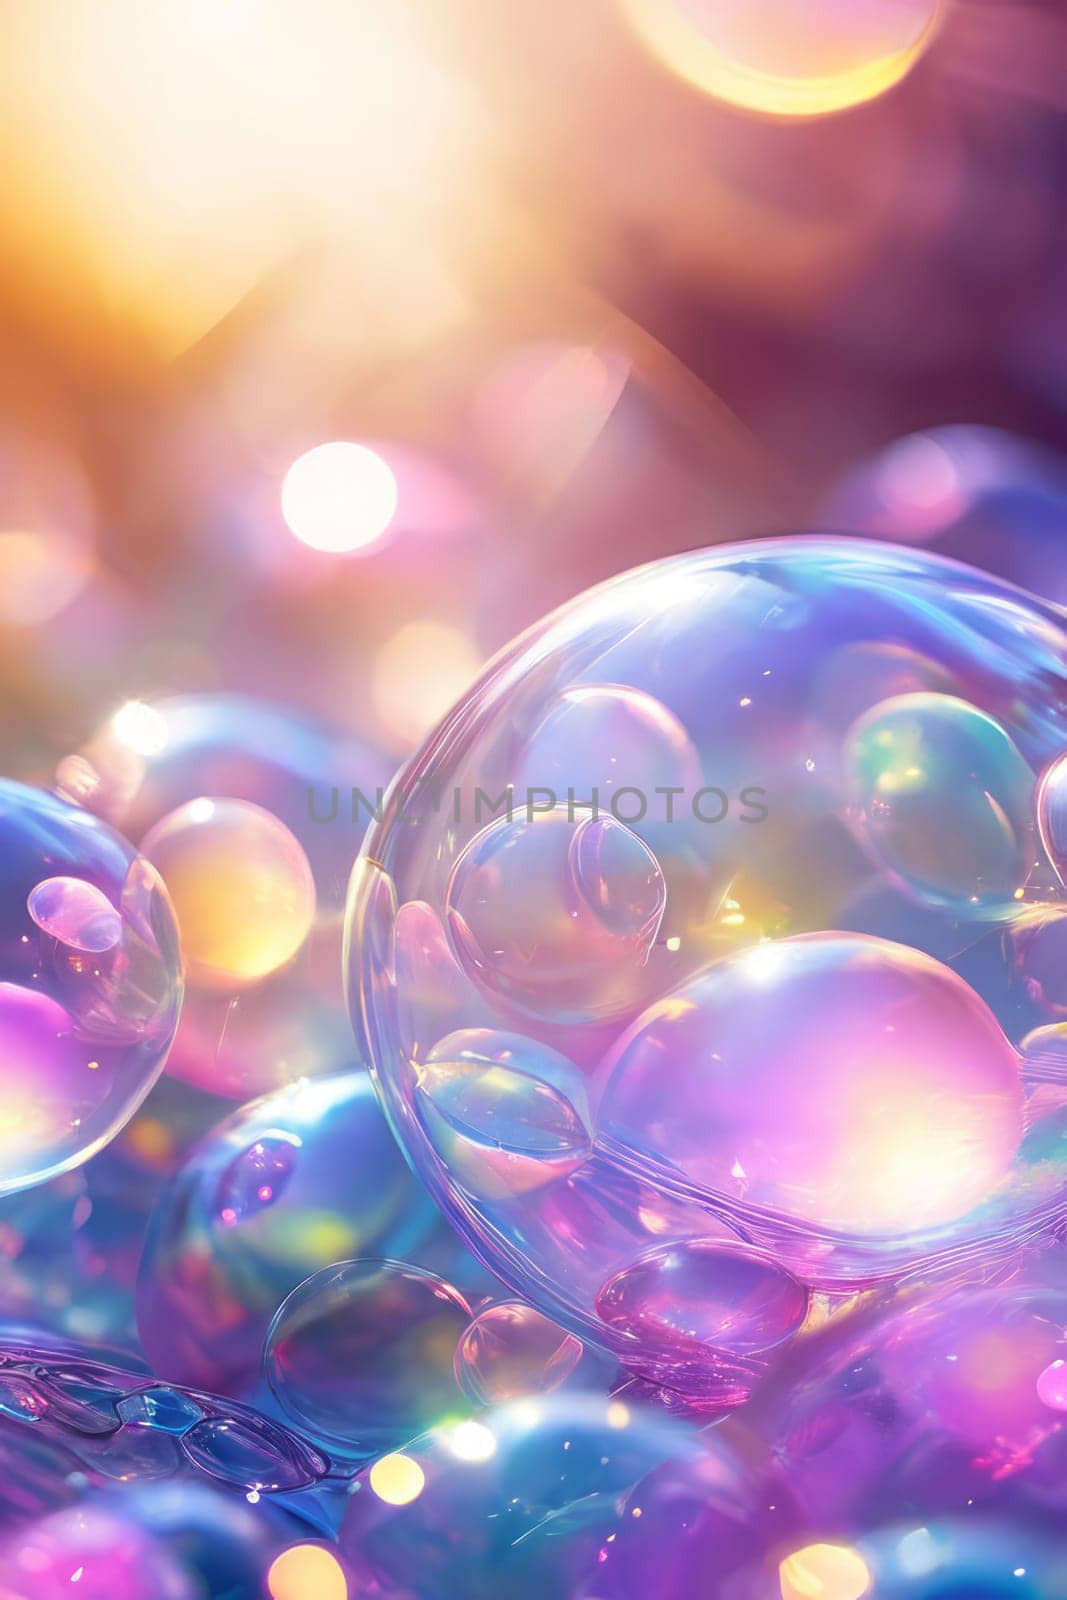 Colorful abstract background with a bubble blur effect